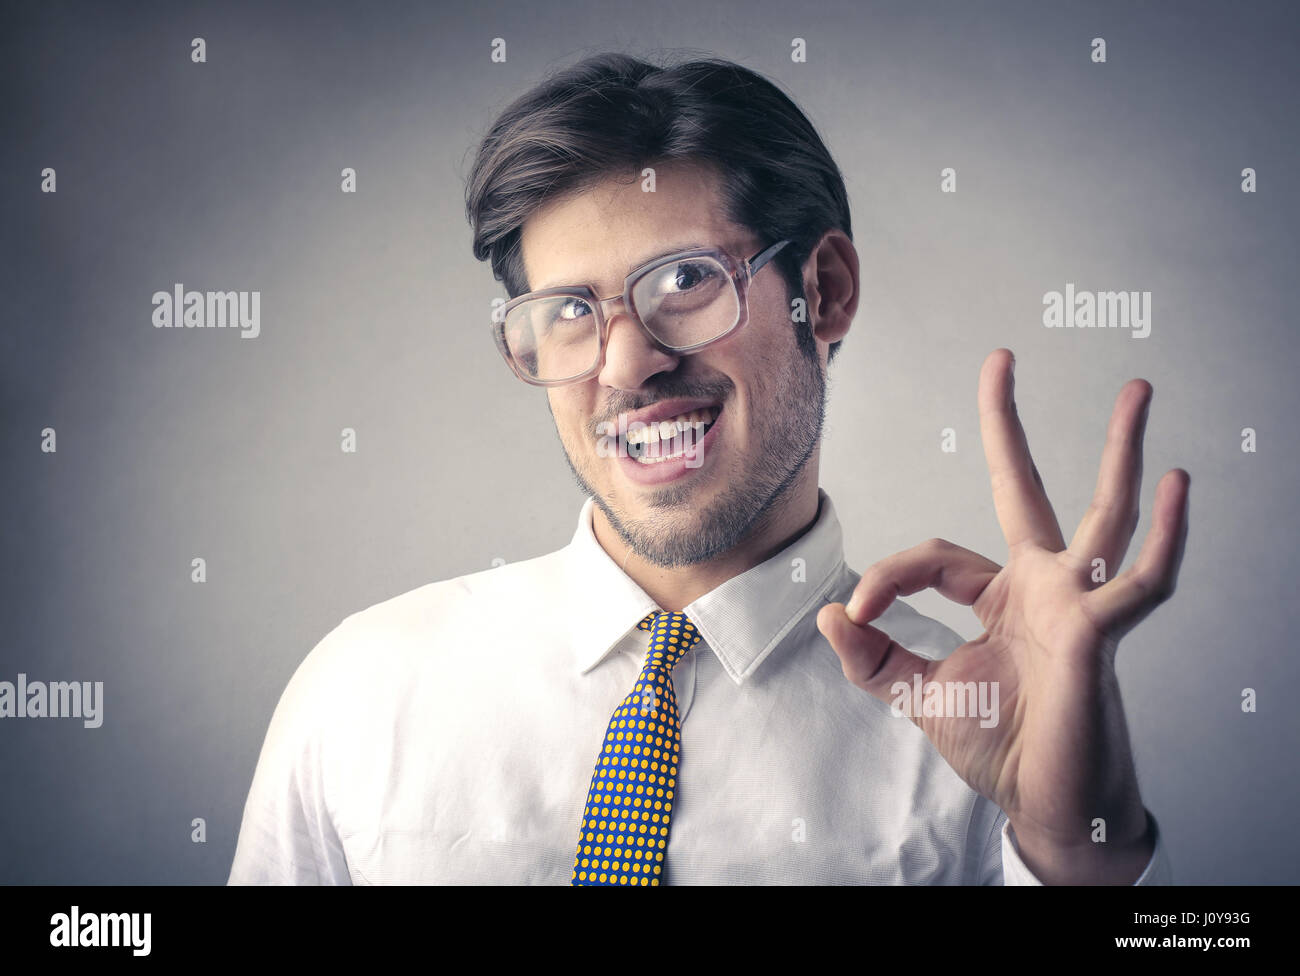 Businessman making perfect sign Stock Photo